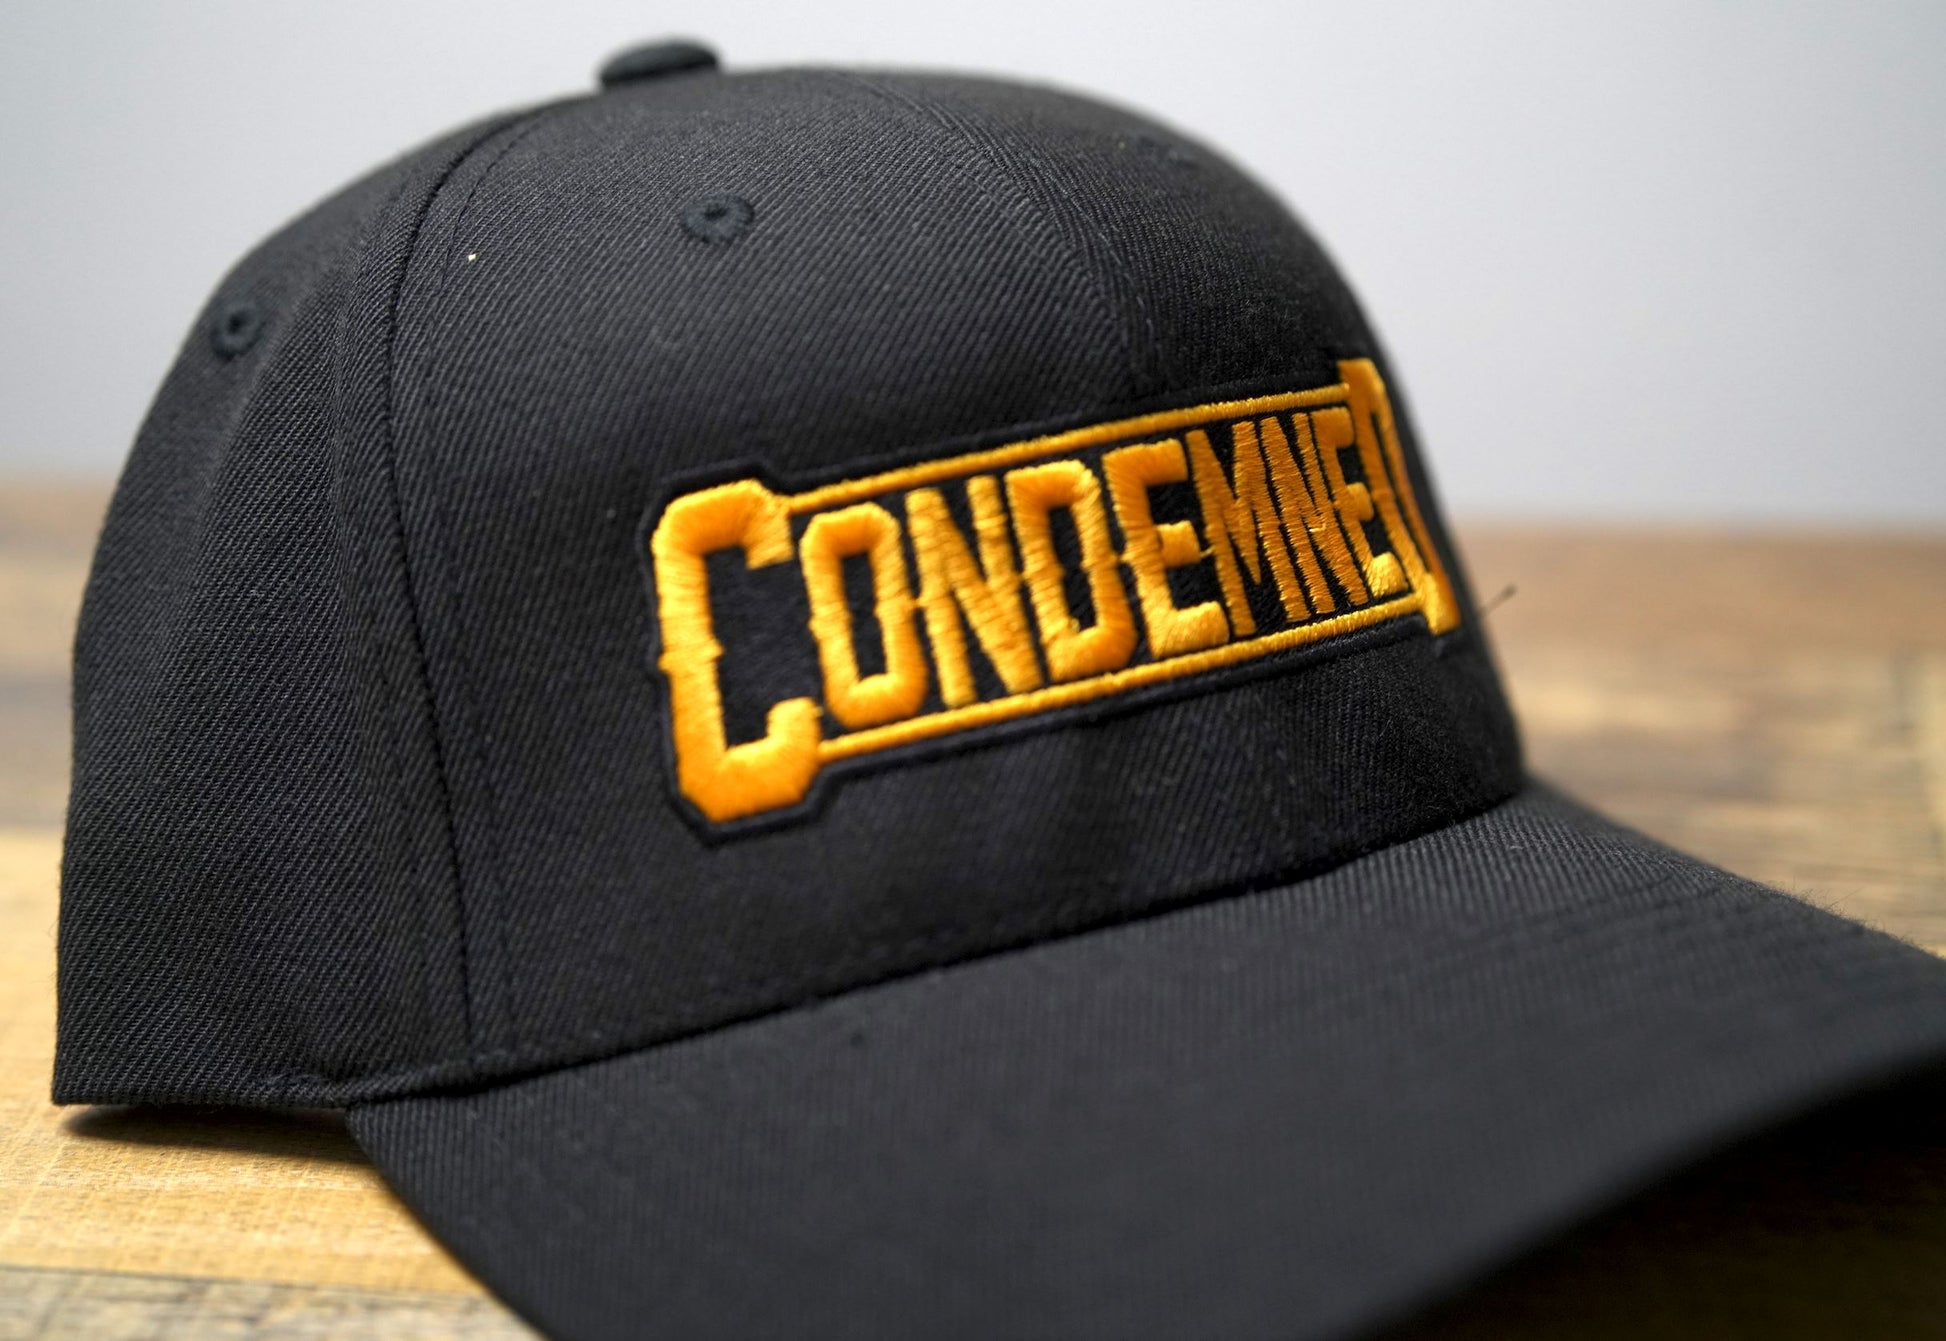 Premium Curved Bill Snapback Lid Apparel & Accessories Condemned Labz 